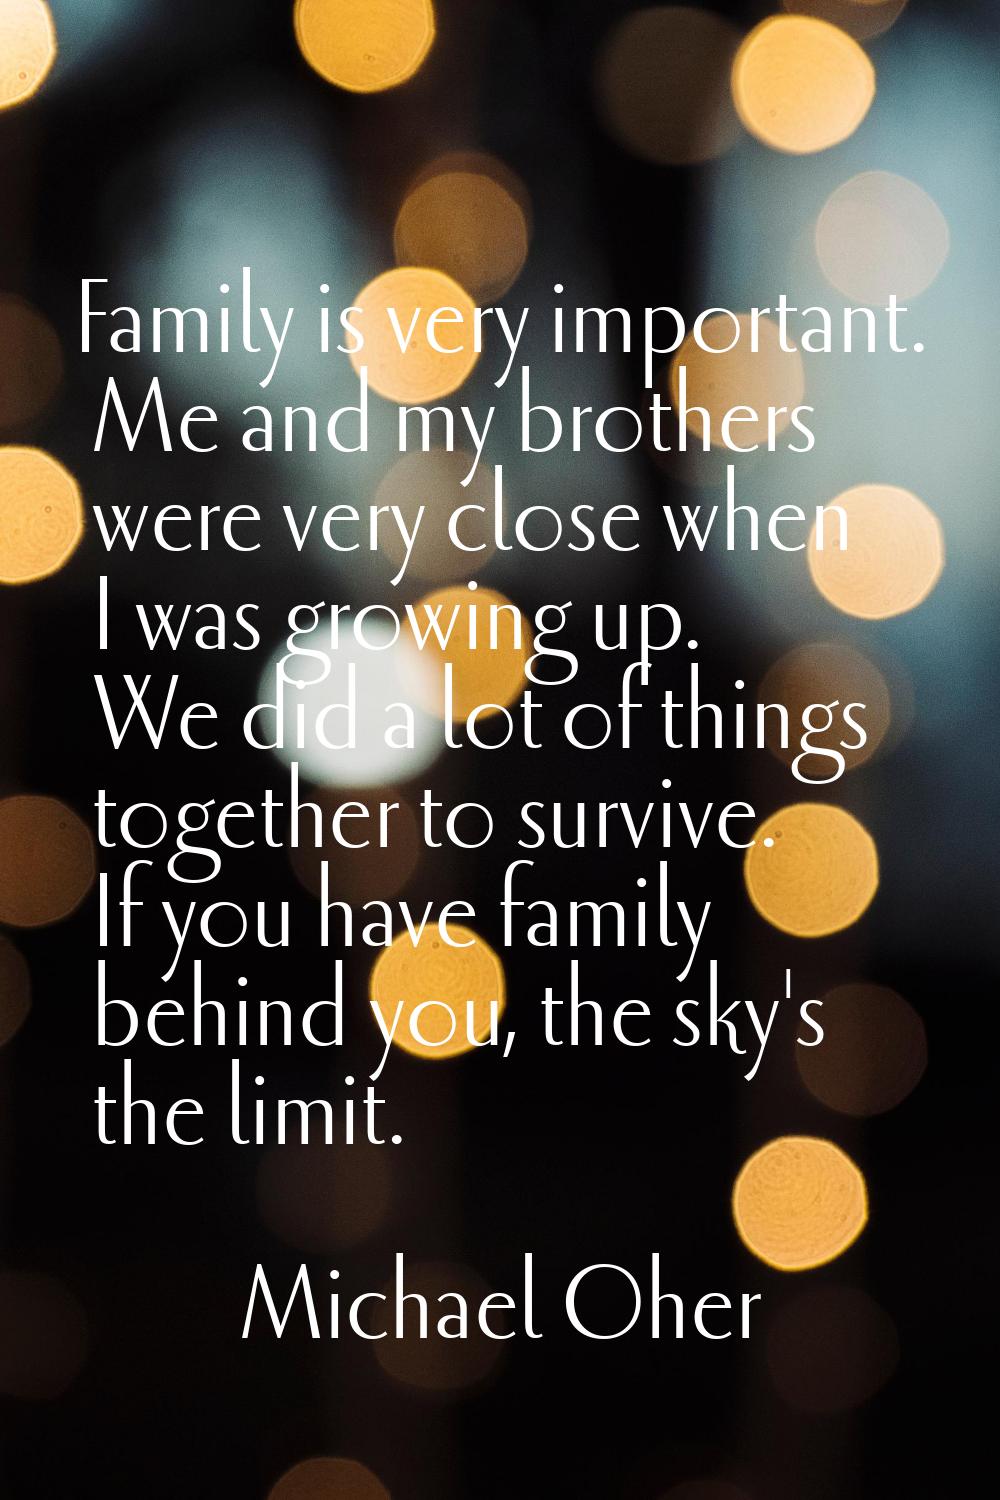 Family is very important. Me and my brothers were very close when I was growing up. We did a lot of